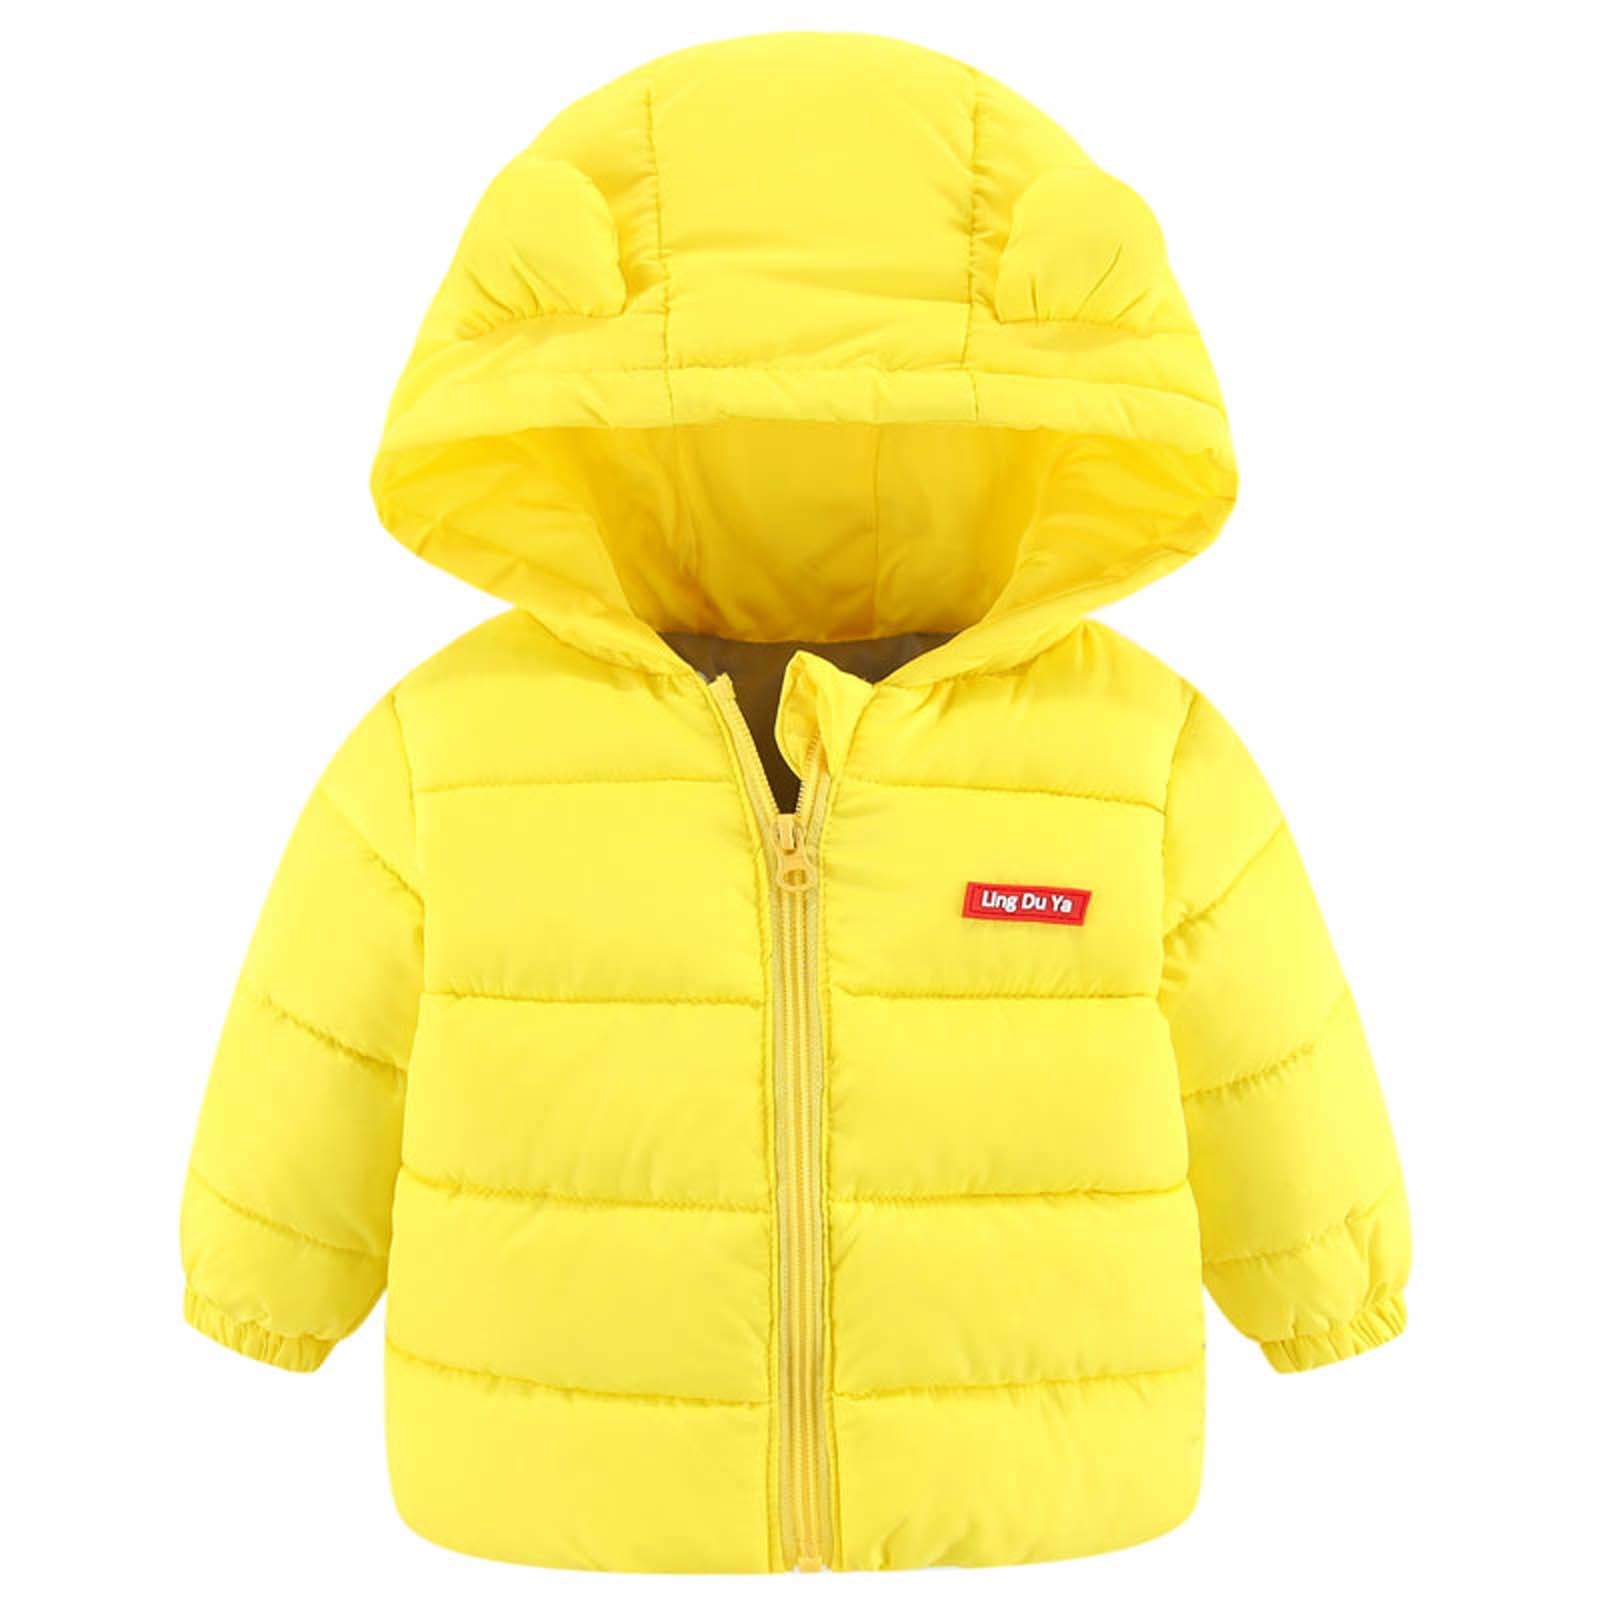 CARETOO Kids Girls Boy Sweet Winter Warm Down Jacket Thickened Winter Jacket Hooded Cold Protection Windbreak Snow Suits 